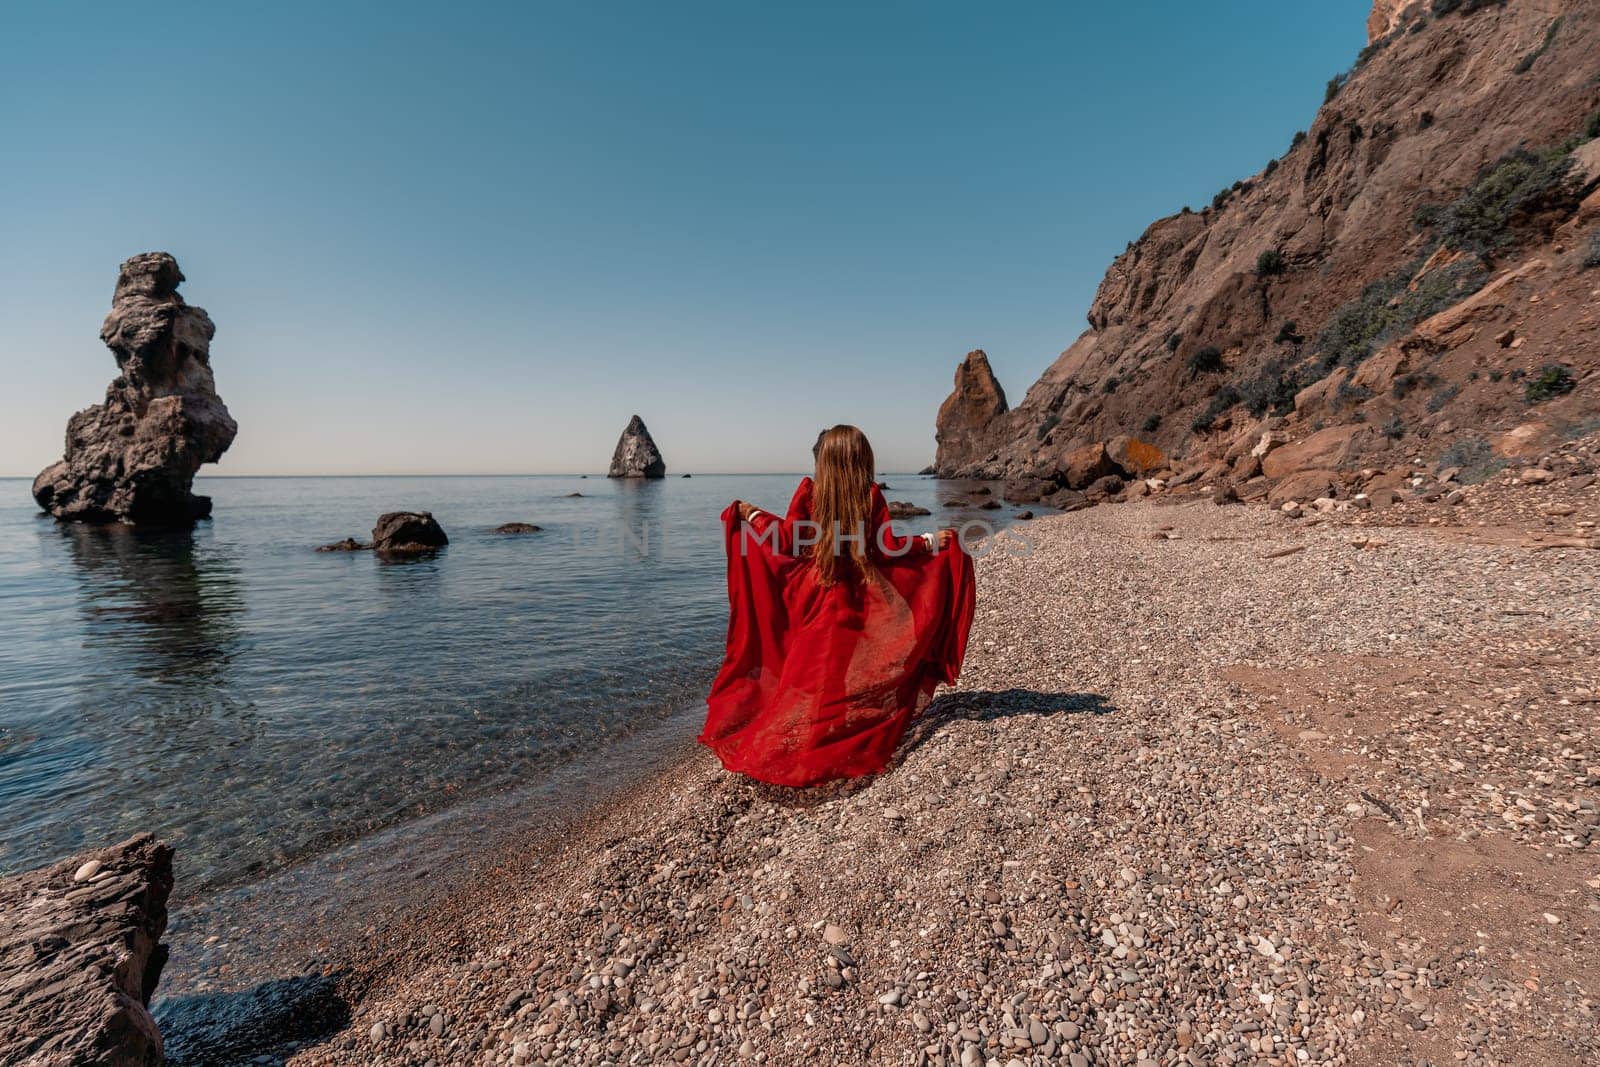 A woman in a red dress stands on a beach with a rocky shoreline in the background. The scene is serene and peaceful, with the woman's red dress contrasting against the natural elements of the beach